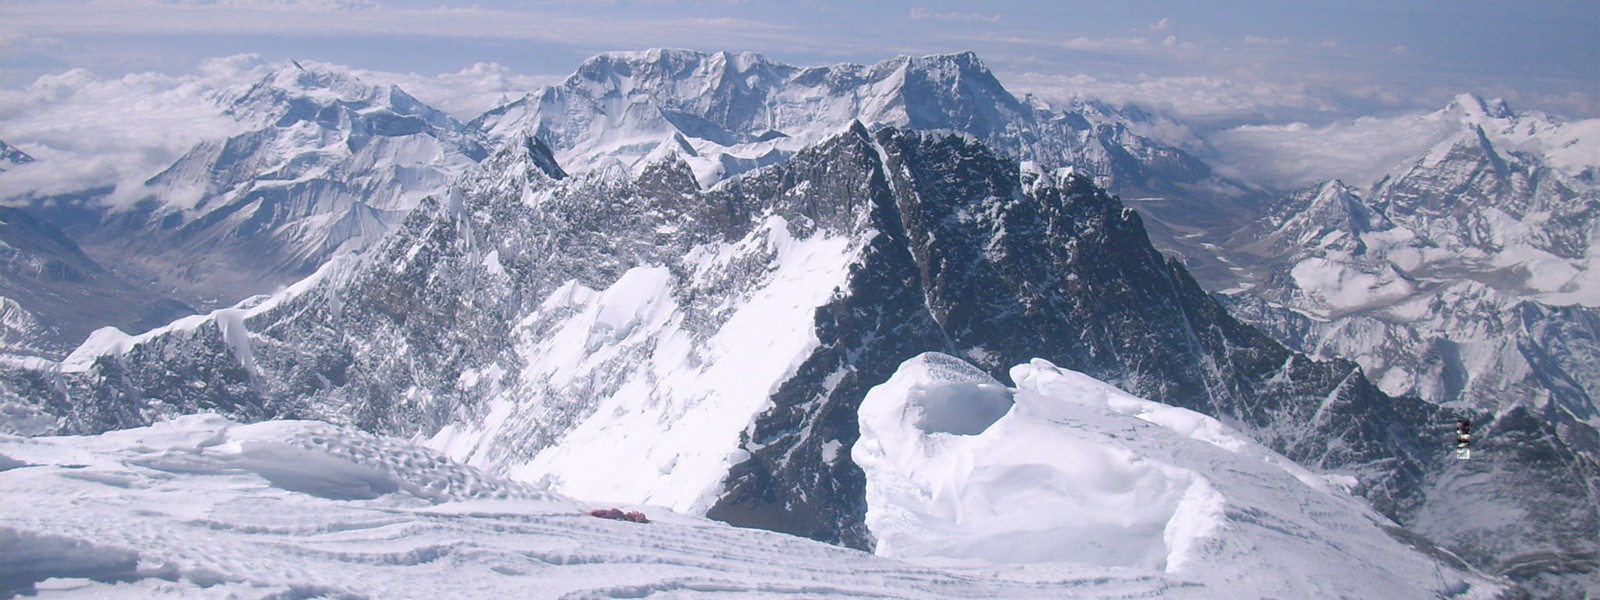 Mount Lhotse summit seen from Everest South Col Summit